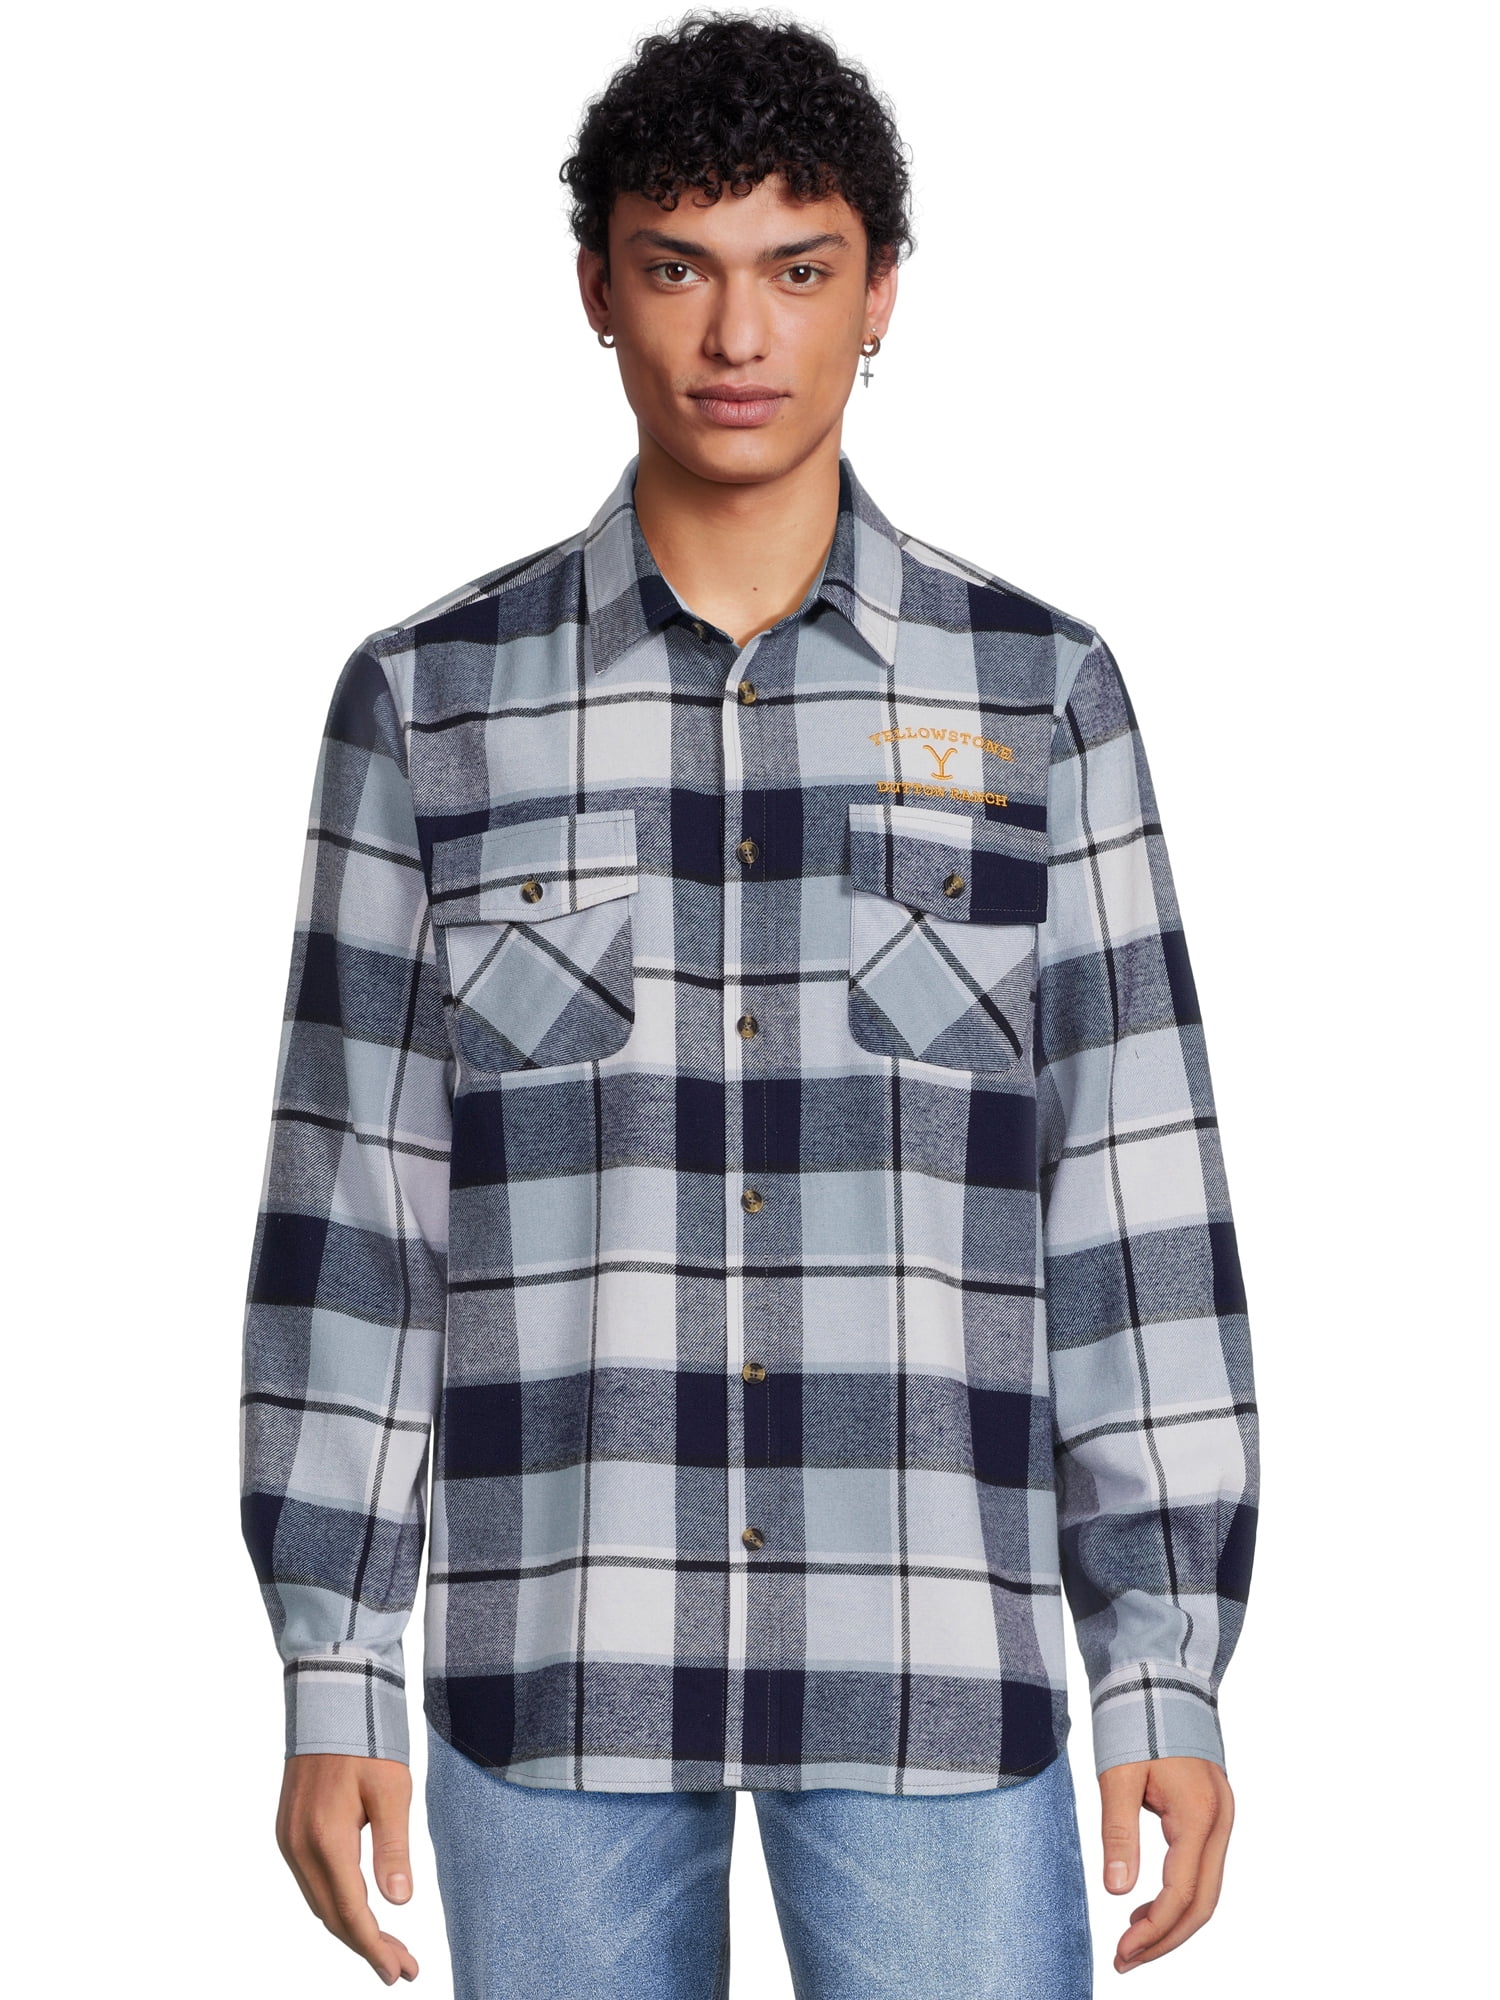 Yellowstone Men's & Big Men's Embroidered Flannel Shirt, Sizes S-3XL ...